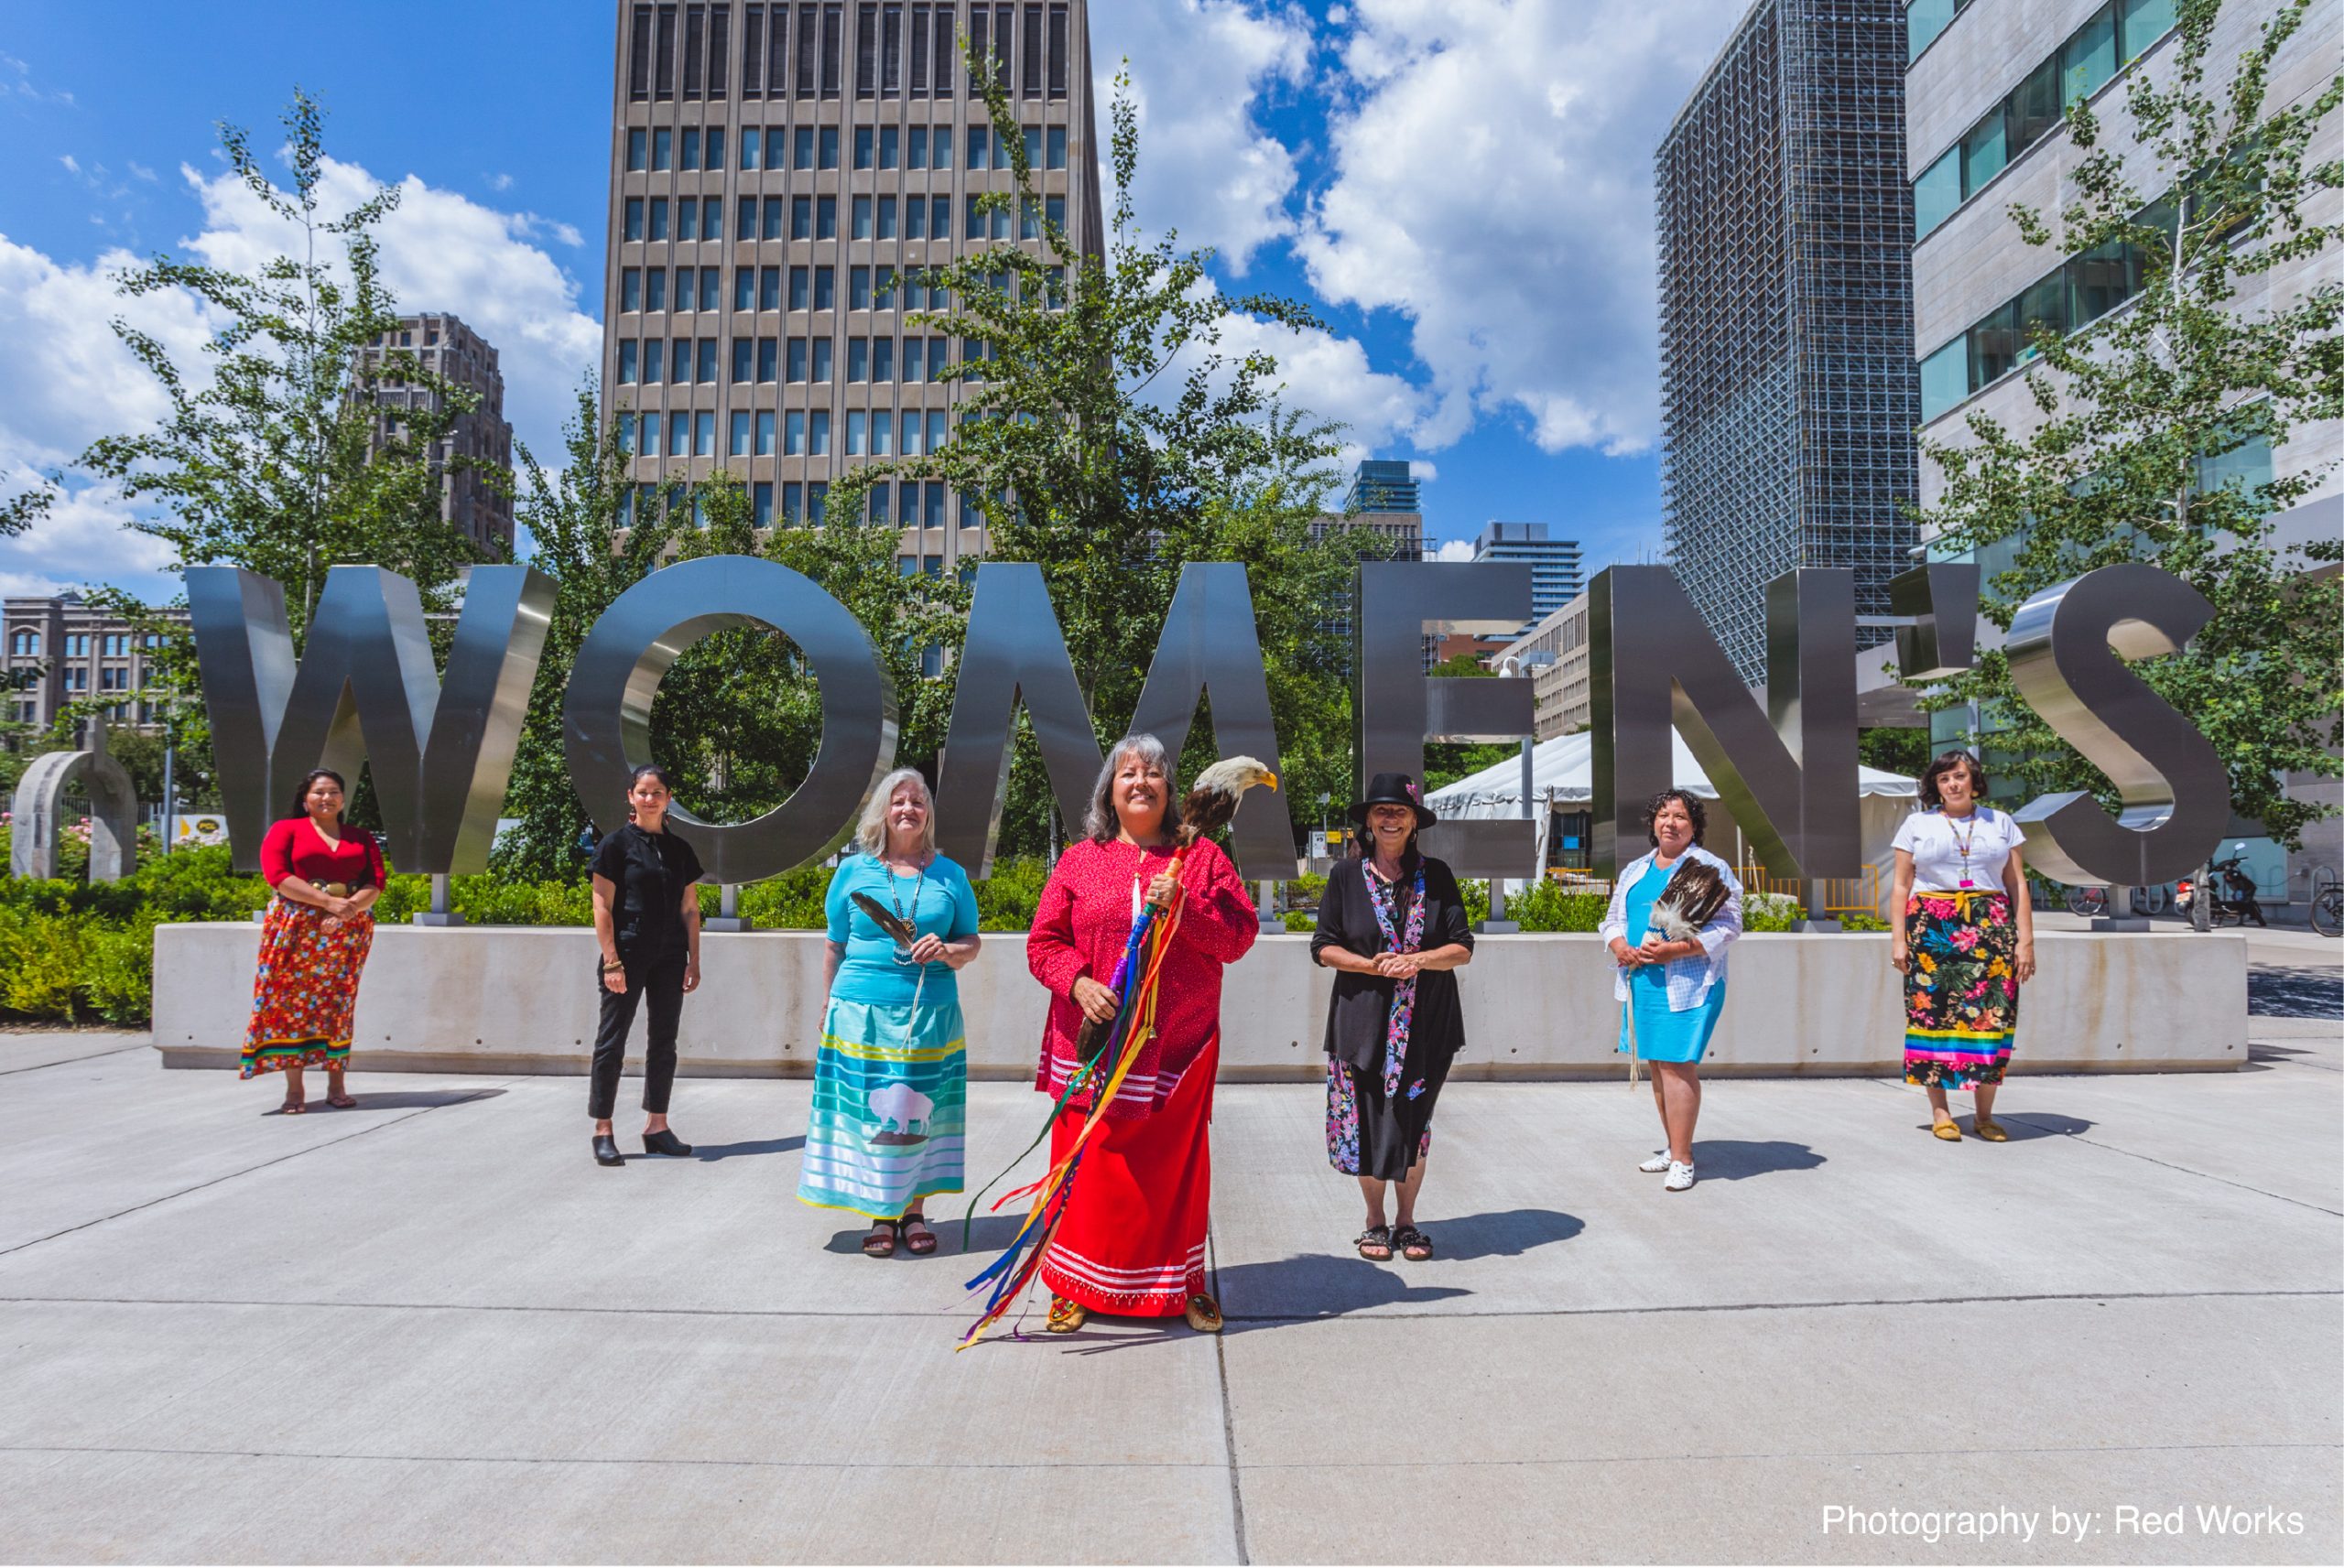 CWP-IH Urban Indigenous COVID-19 Leaders – University of Victoria, Seventh Generation Midwives, Well Living House Research Project & Red Works Photography Poster Series. L-R: Rosary Spence, Dr. Lisa Richardson, Constance Simmonds, Kahontakwas Diane Longboat, Banakonda Bell, Cynthia (Cindy) White/Kawennanoron and Selena Mills